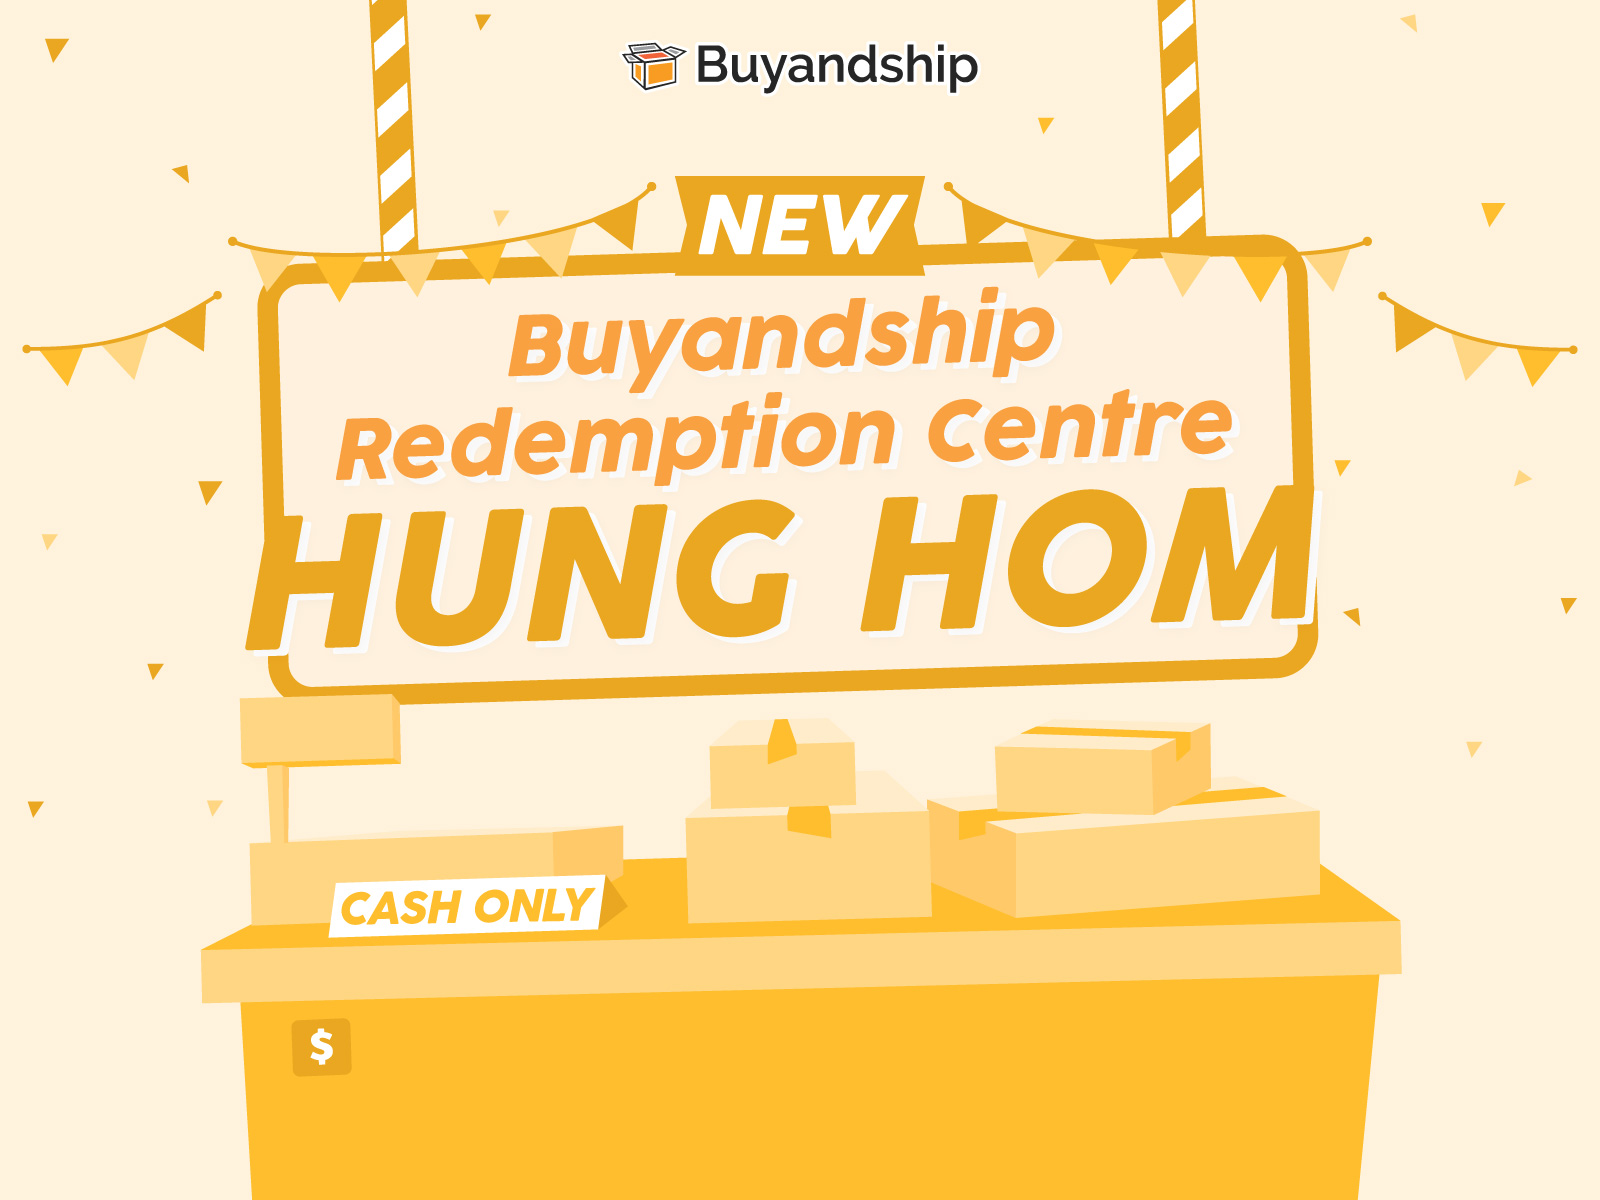 A New Buyandship Redemption Centre Opens in Hung Hom